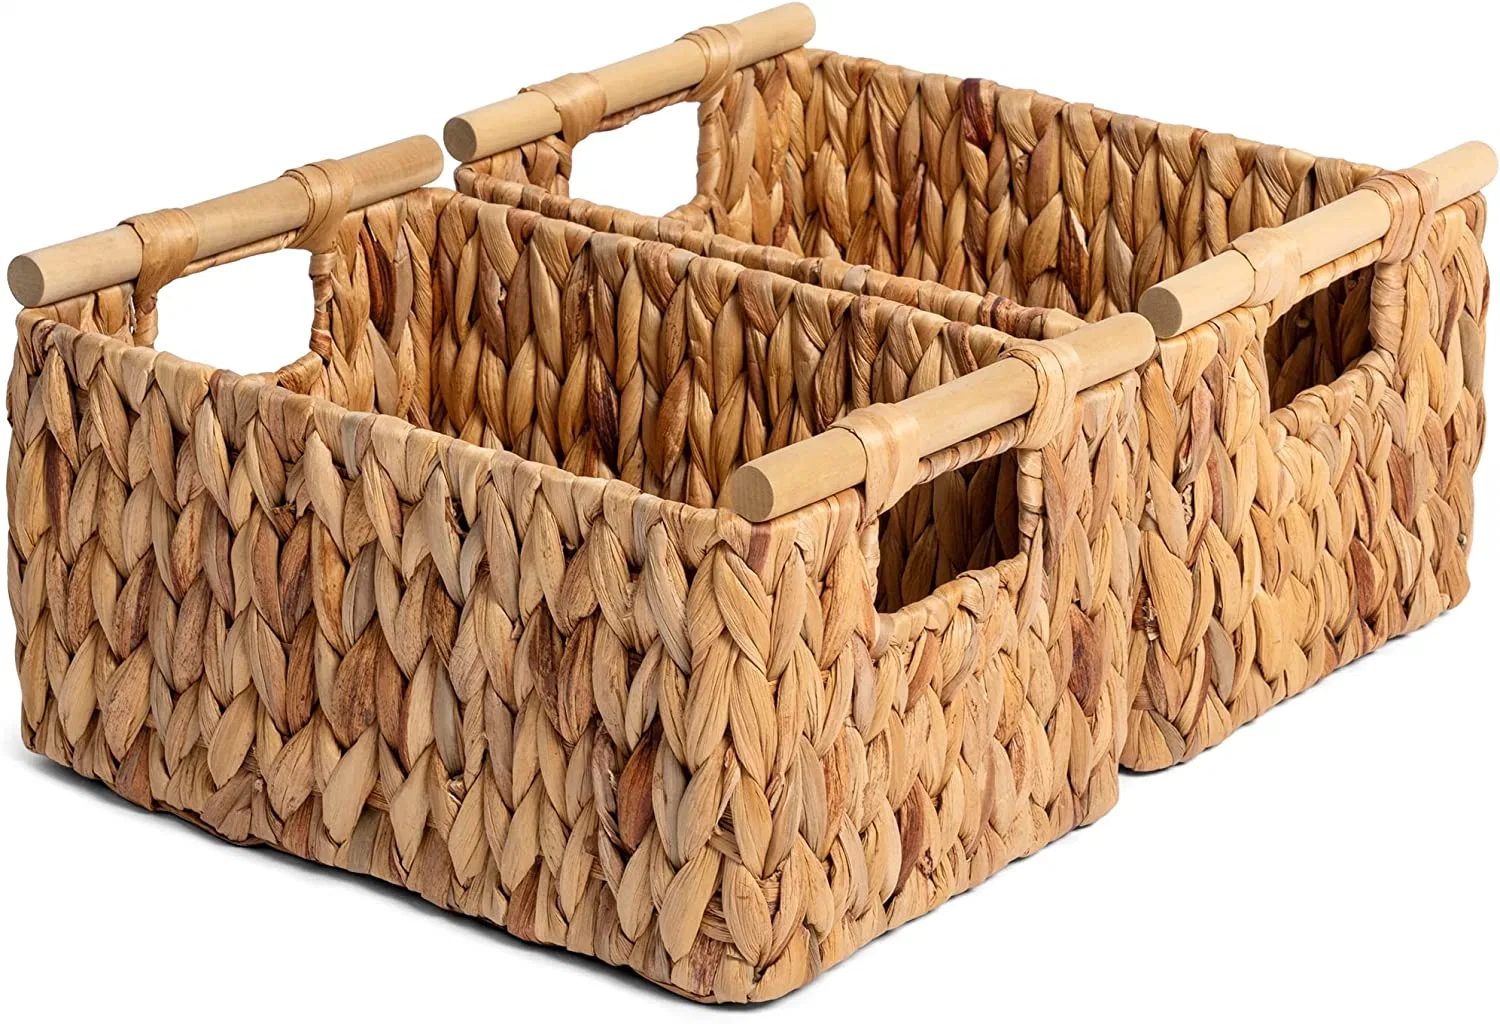 Hand Woven Water Hyacinth Wicker Storage Basket with Wooden Handles